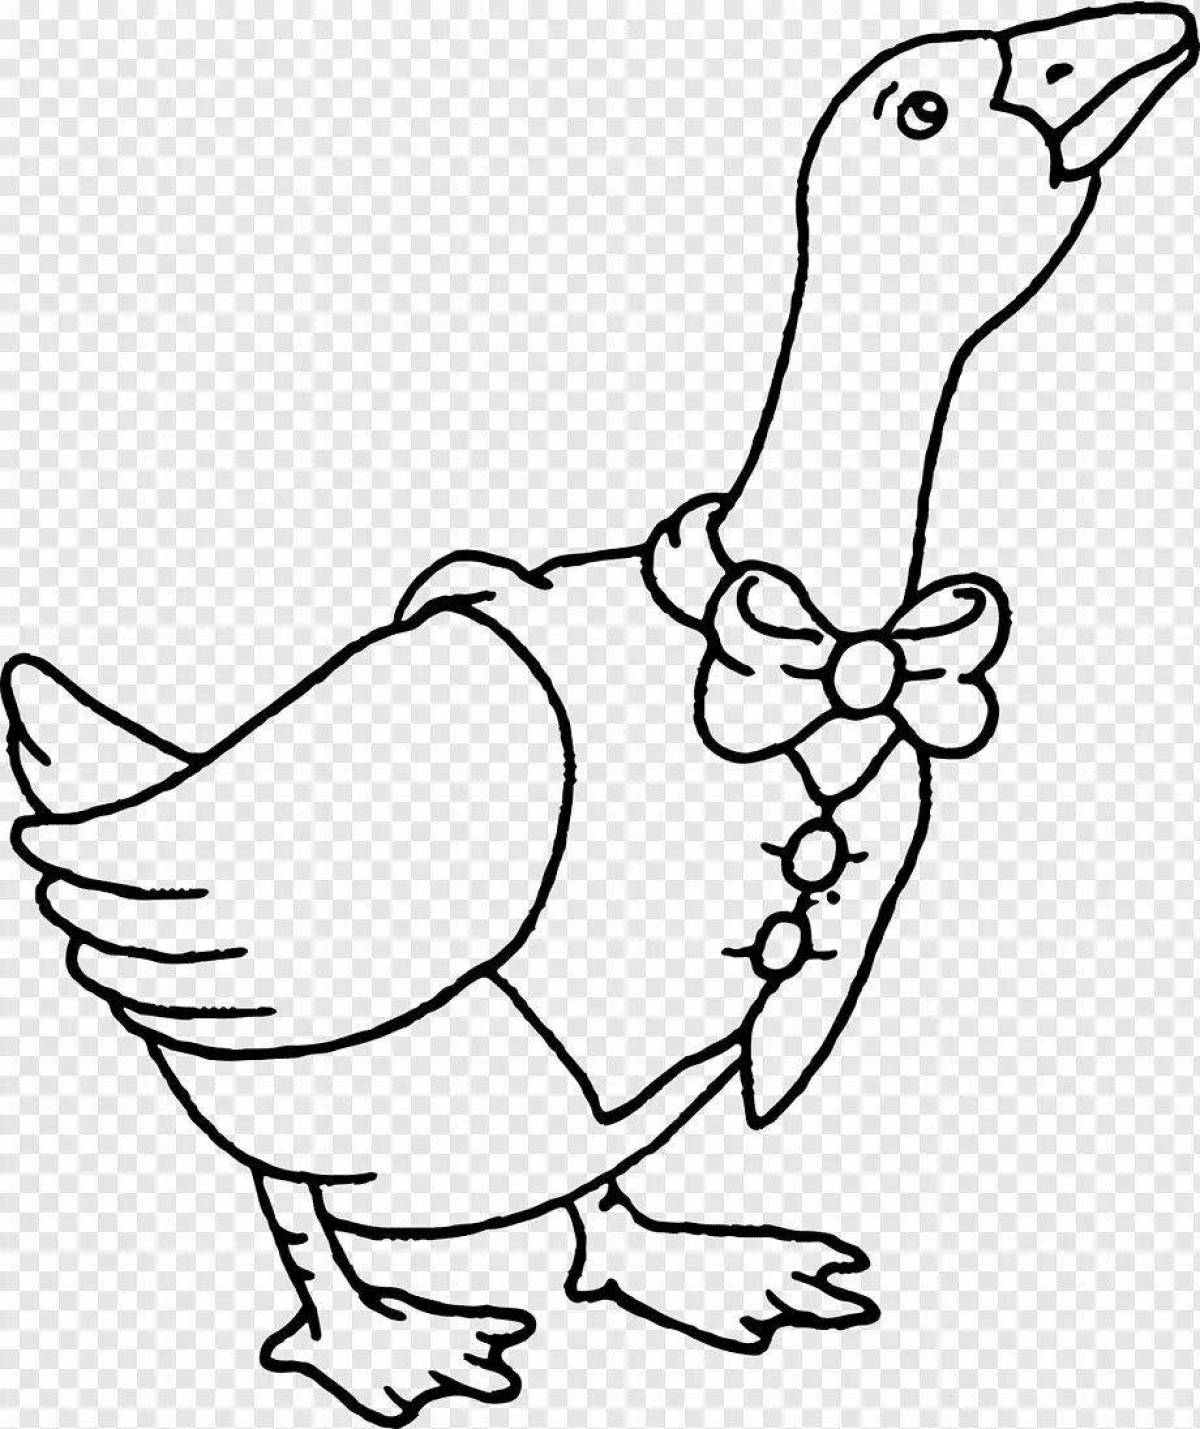 Playful goose coloring page